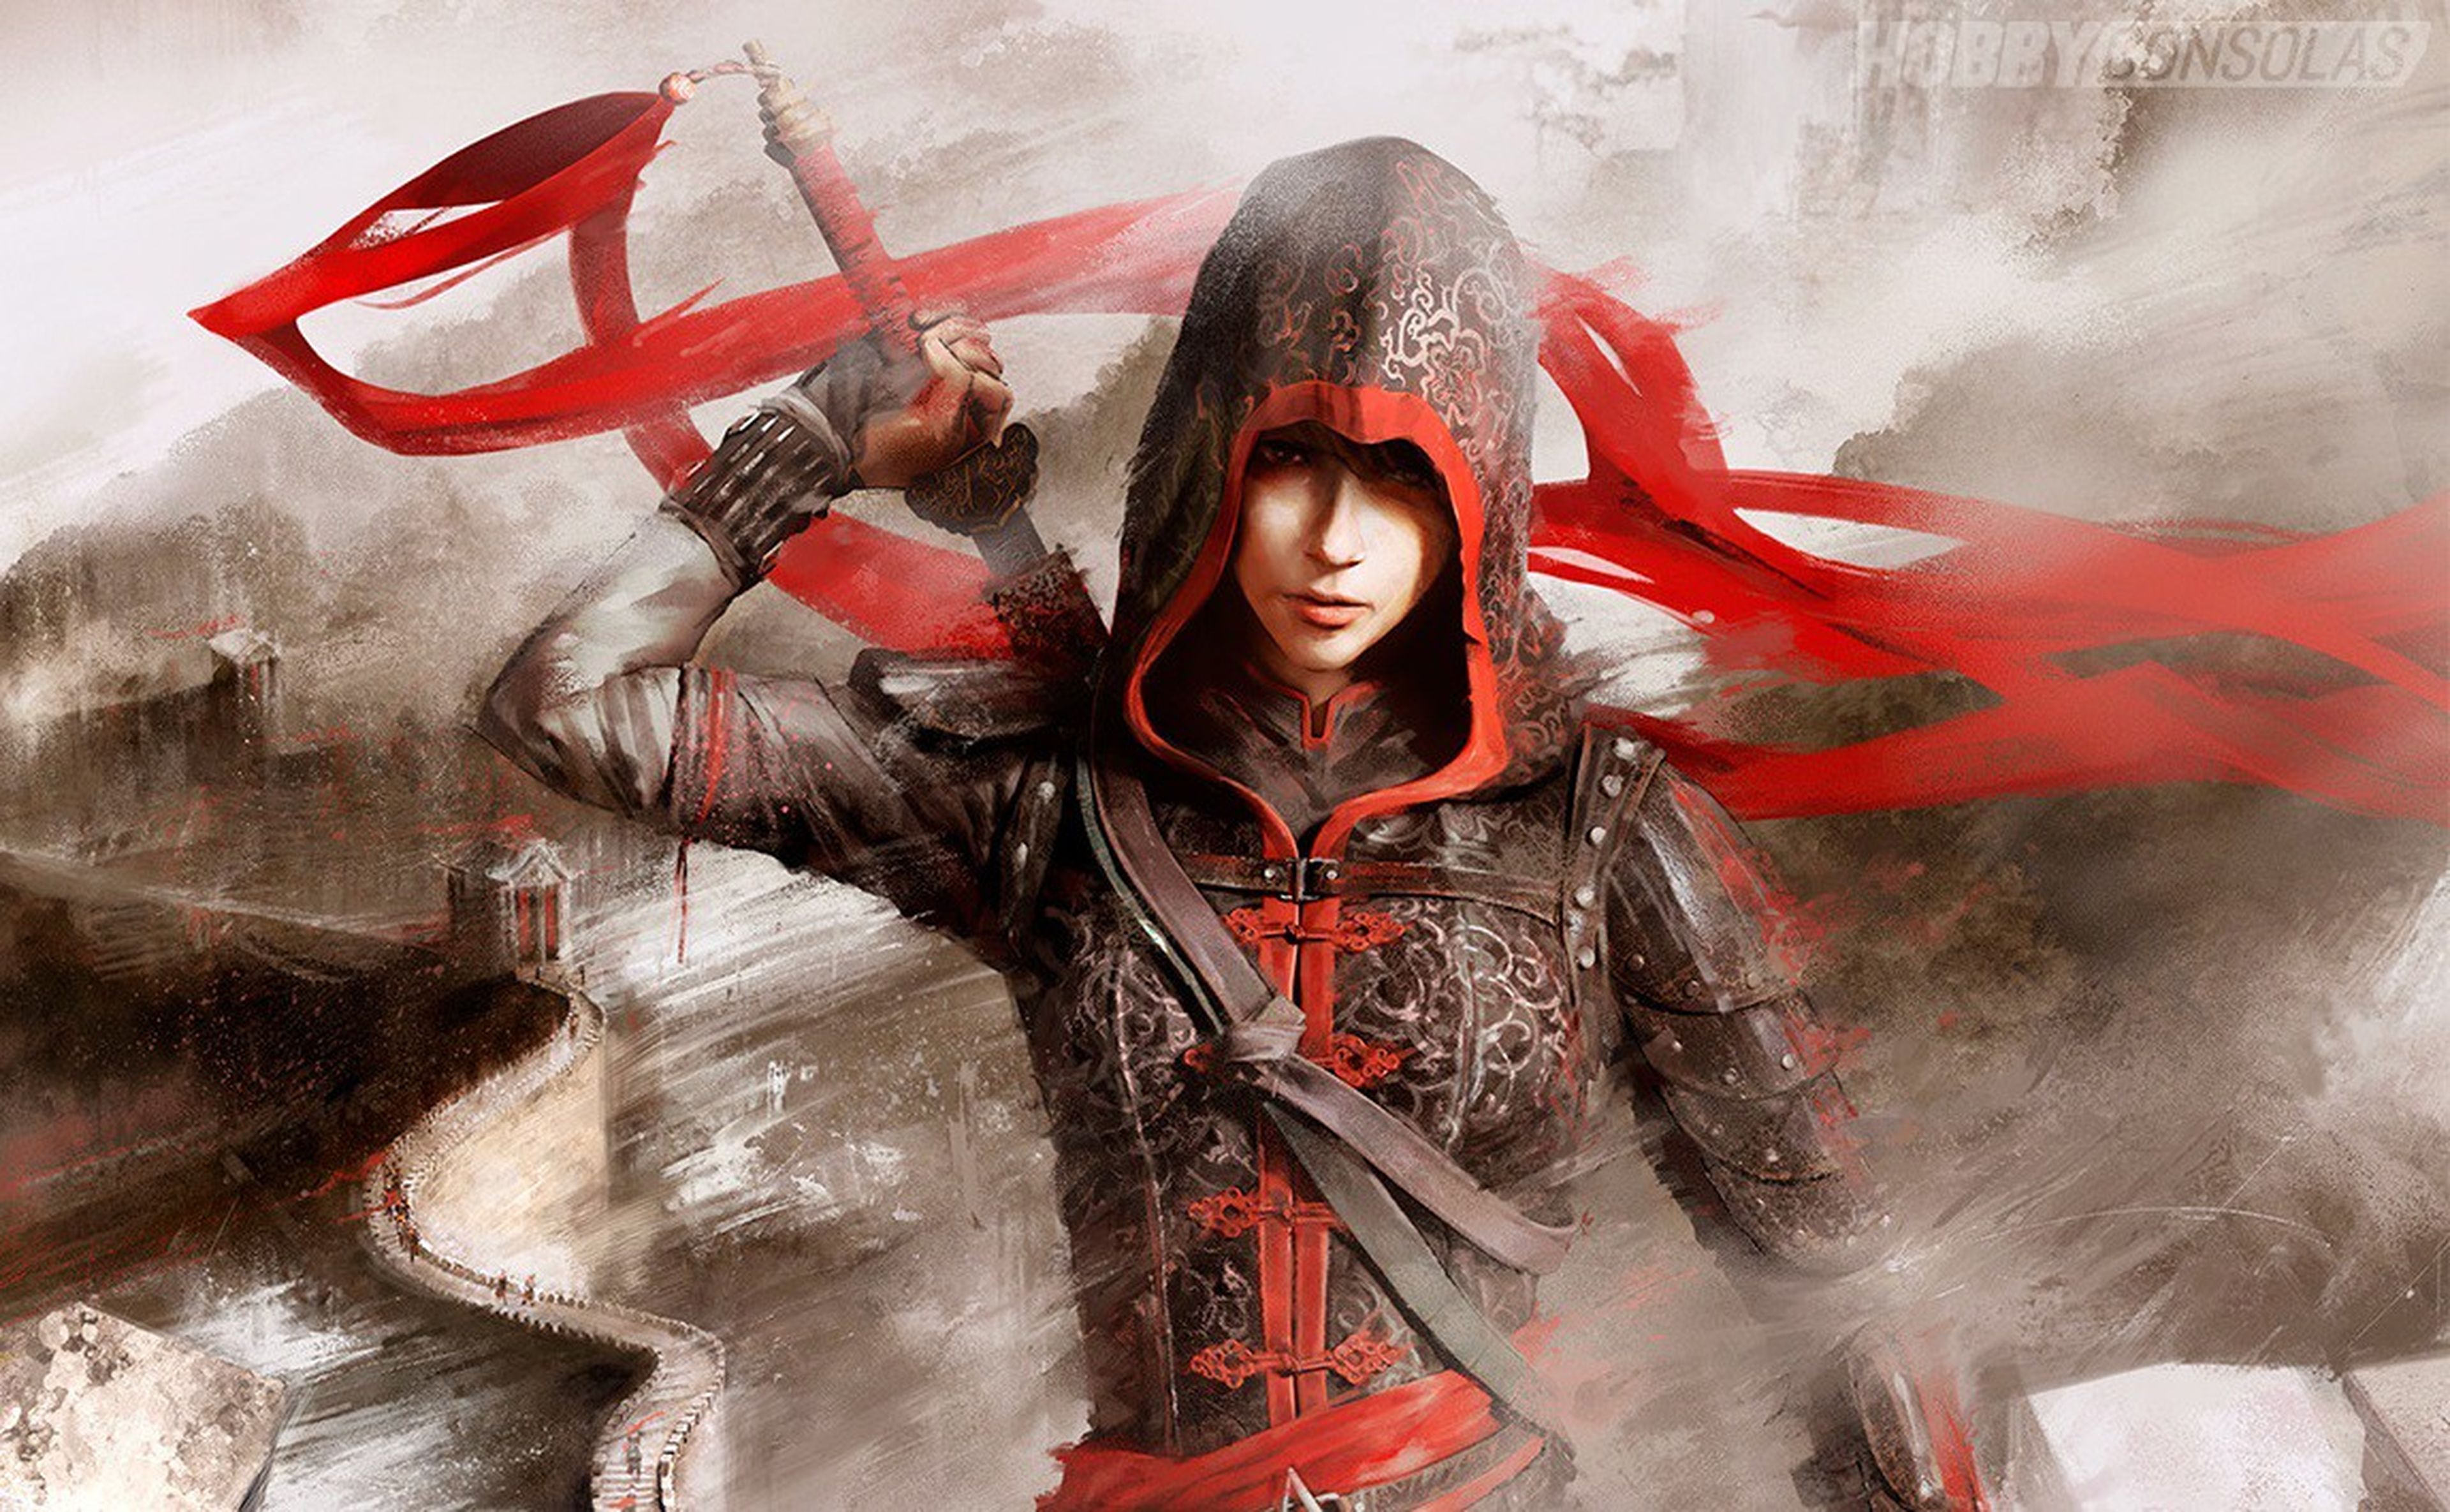 Imágenes de Assassin's Creed Unity Reyes Muertos y Assassin's Creed Chronicles China